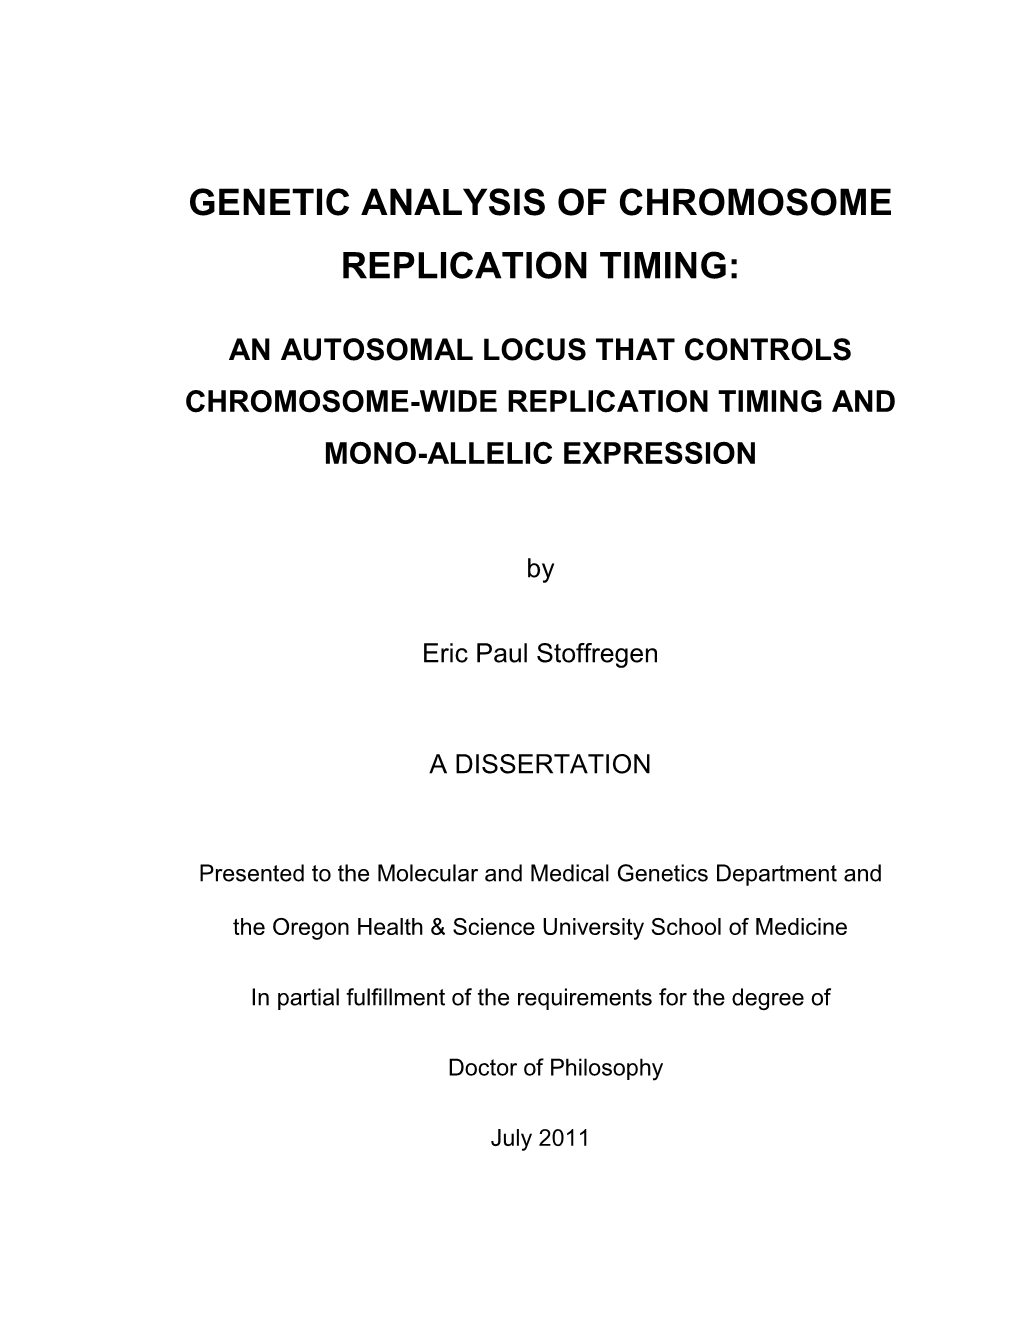 Genetic Analysis of Chromosome Replication Timing